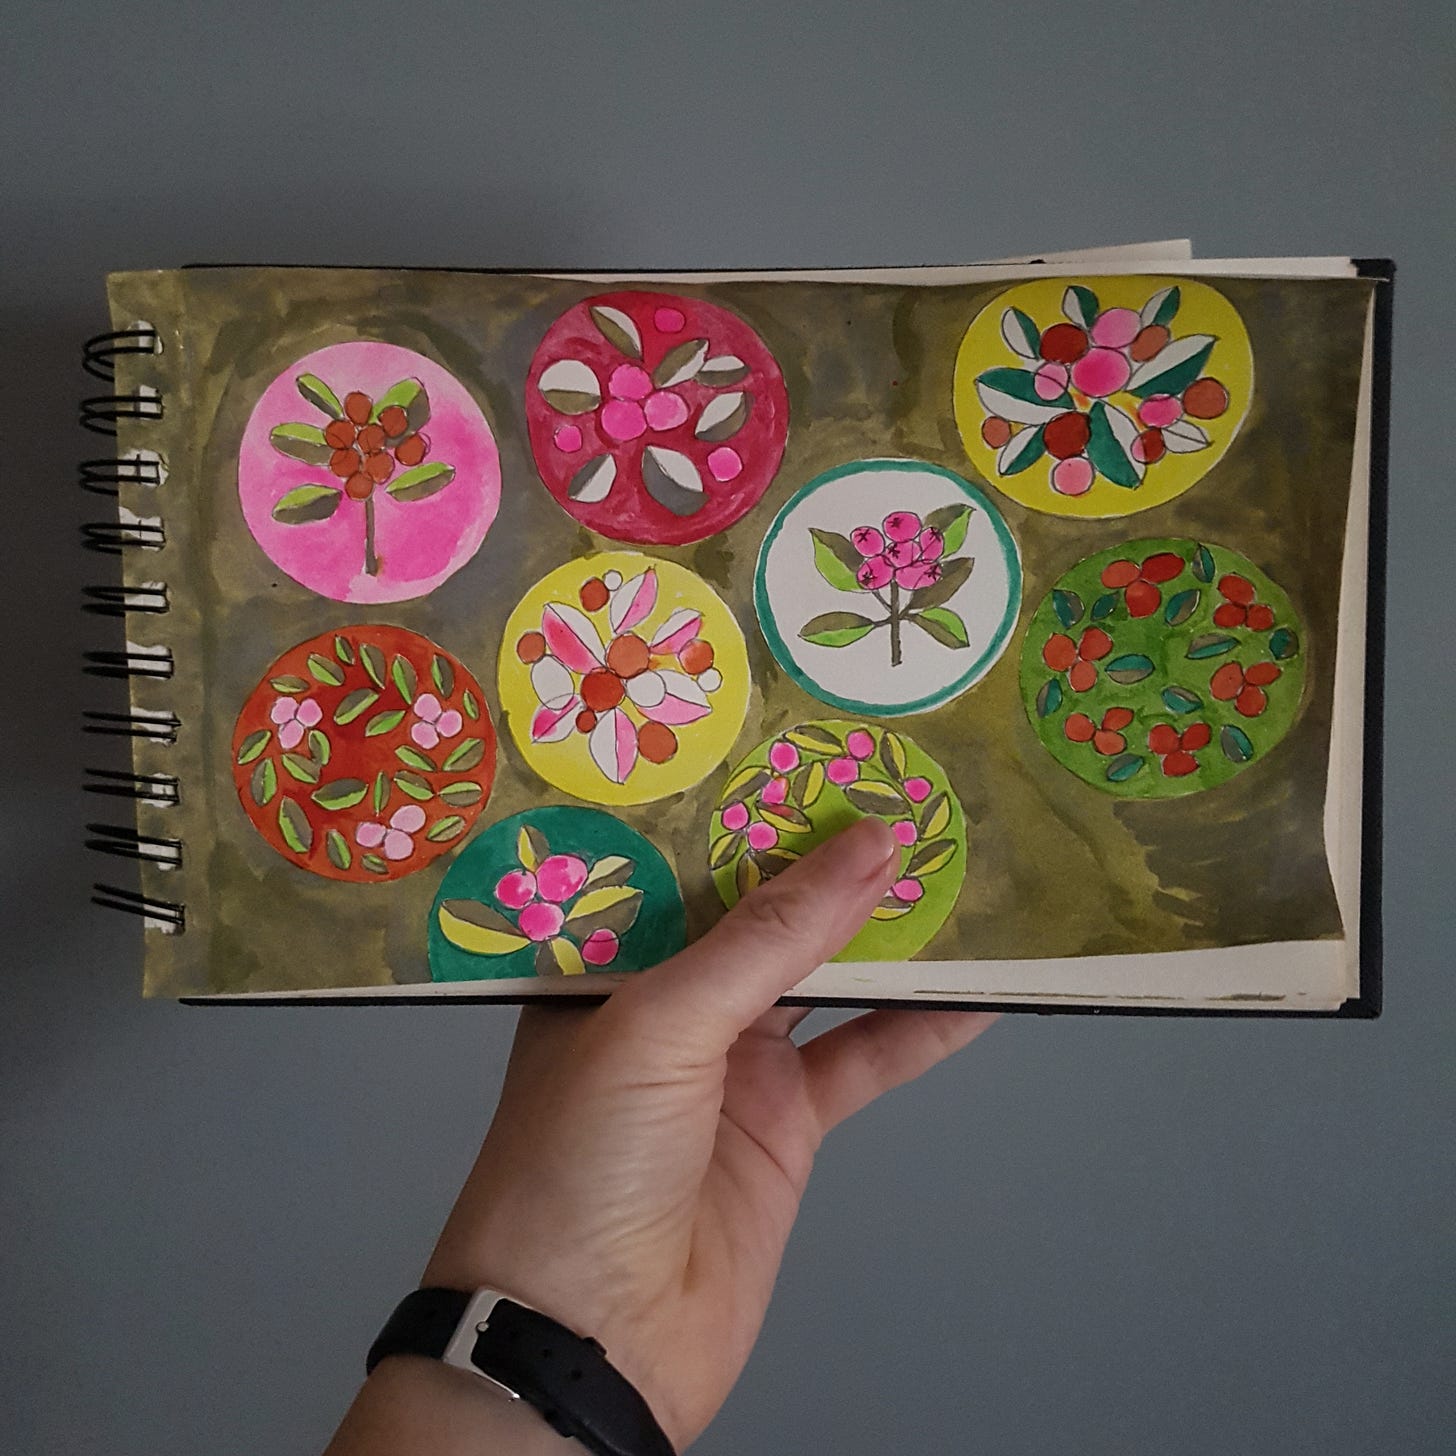 My hand holding up my sketchbook open at the page showing my leaf and berry designs on a murky green background